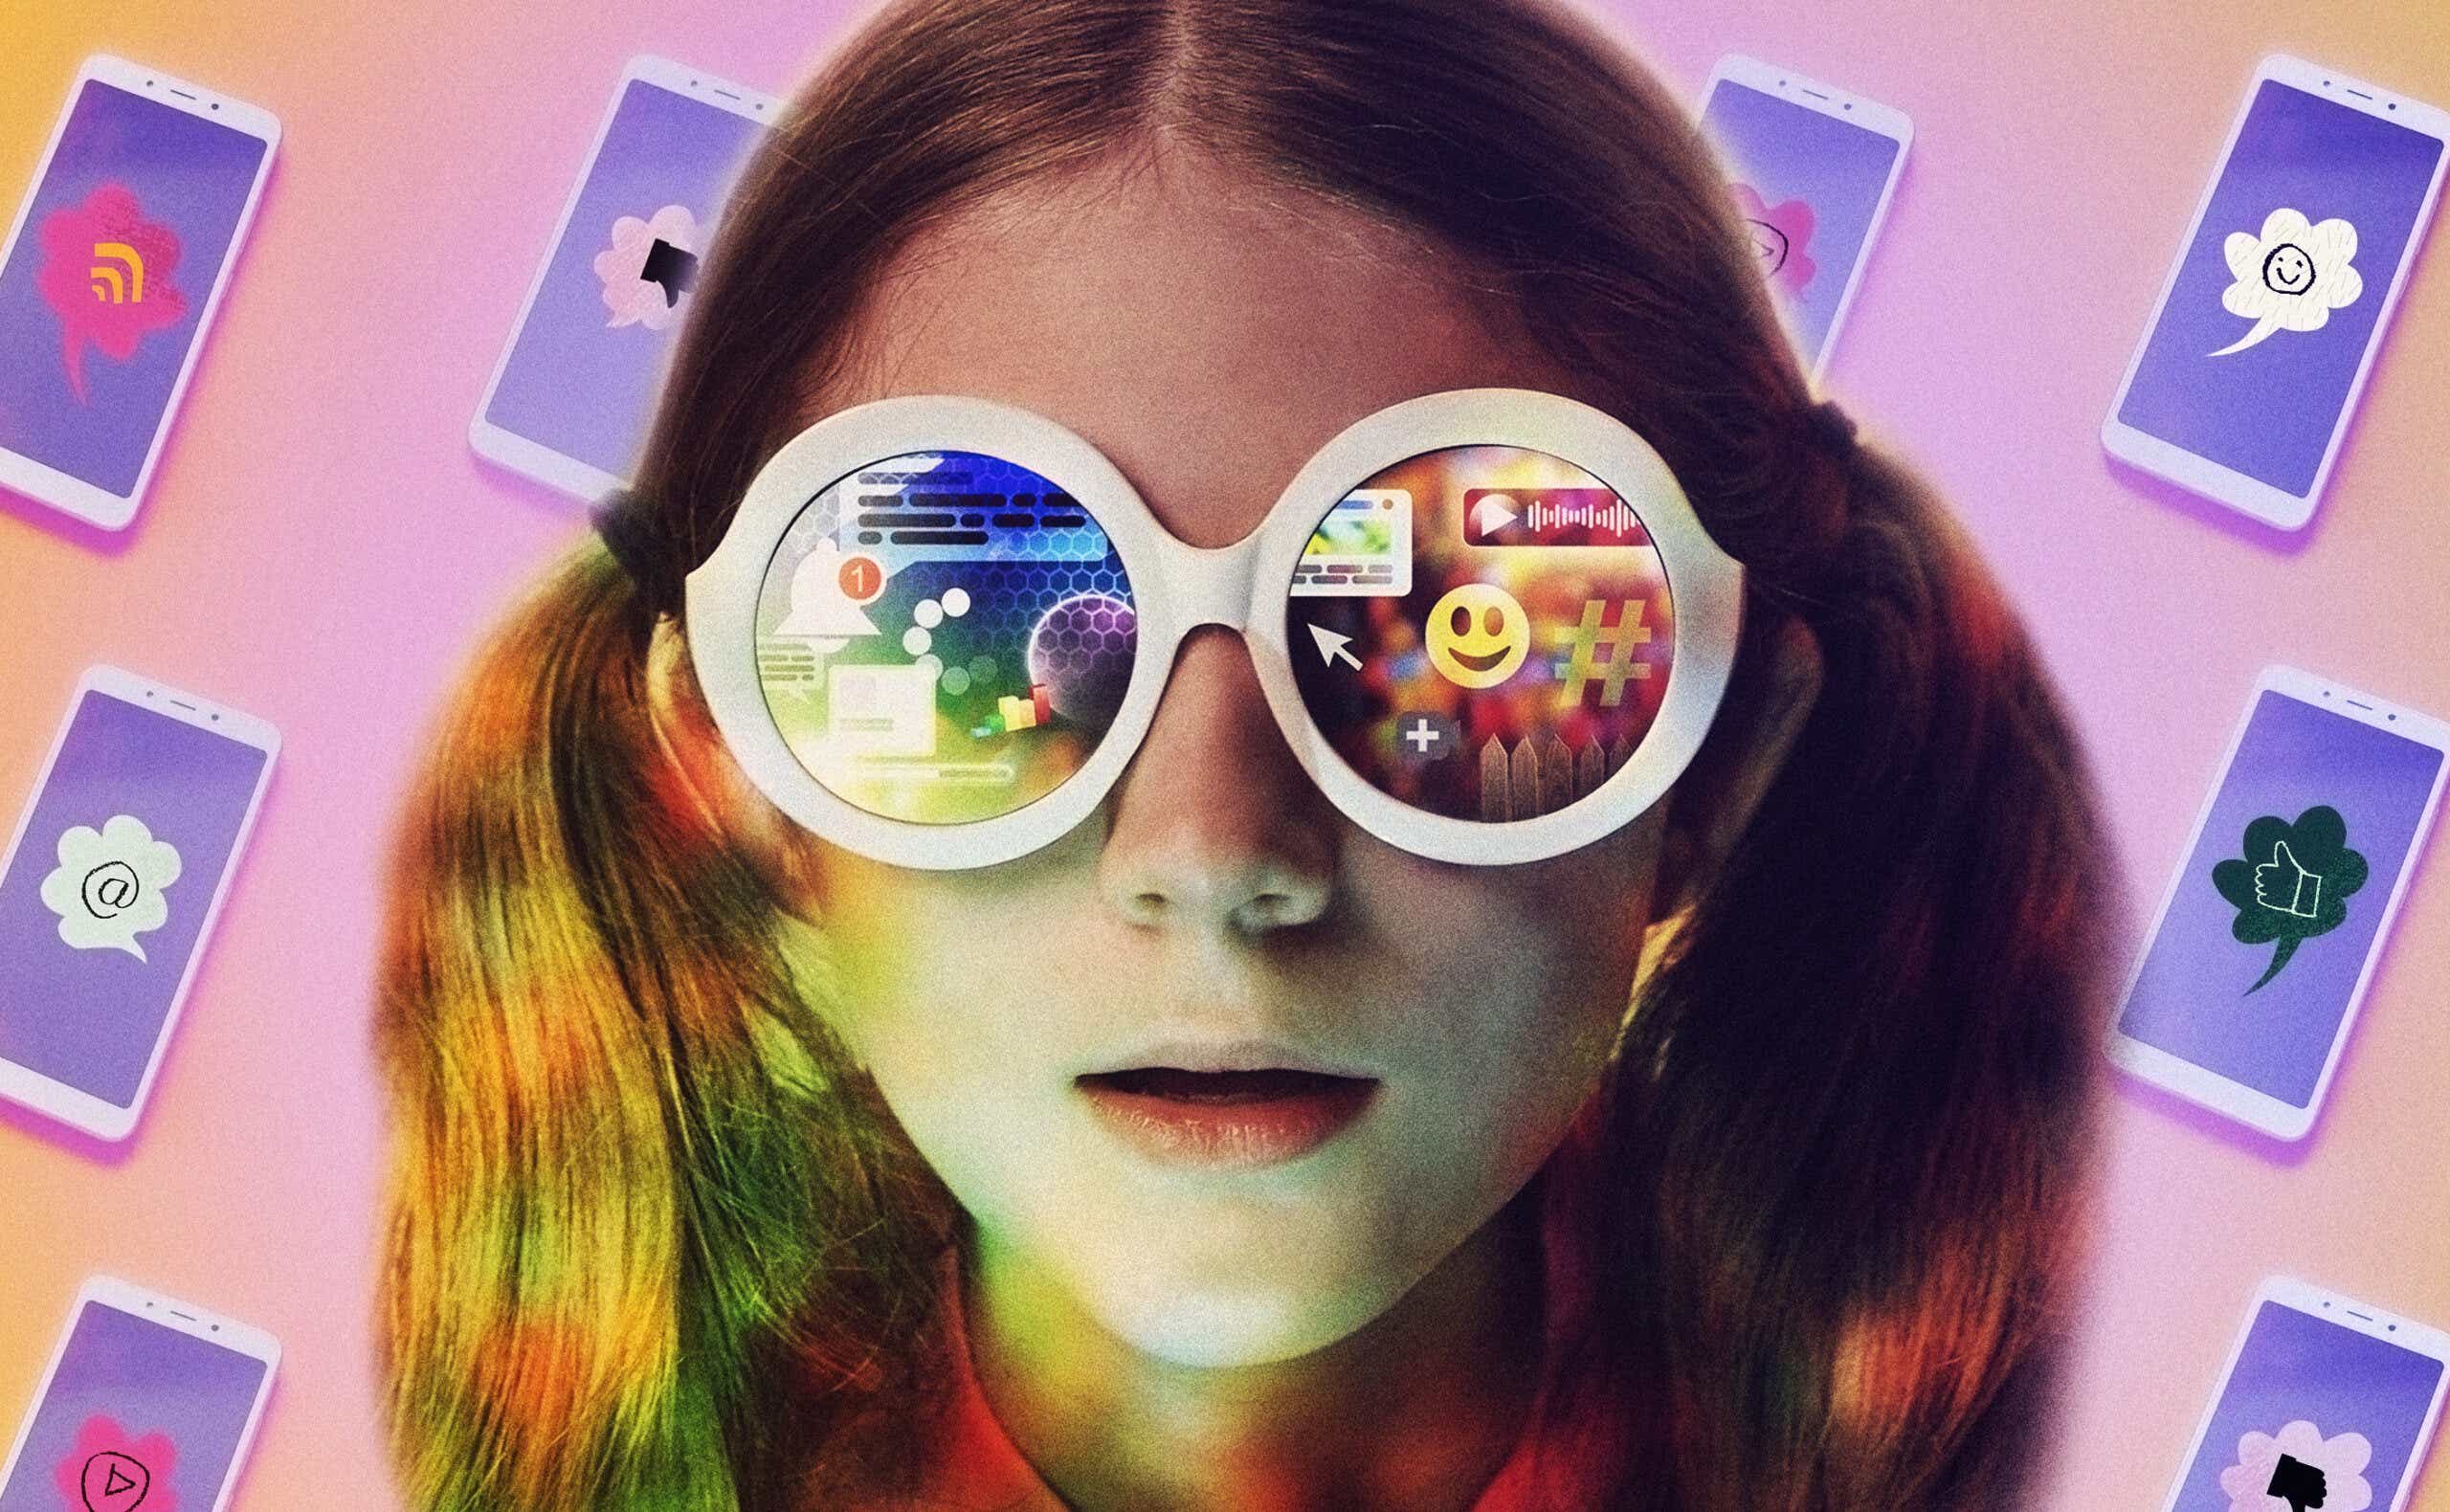 little girl with reflection of social media icons in her sunglasses against a backdrop of iphones